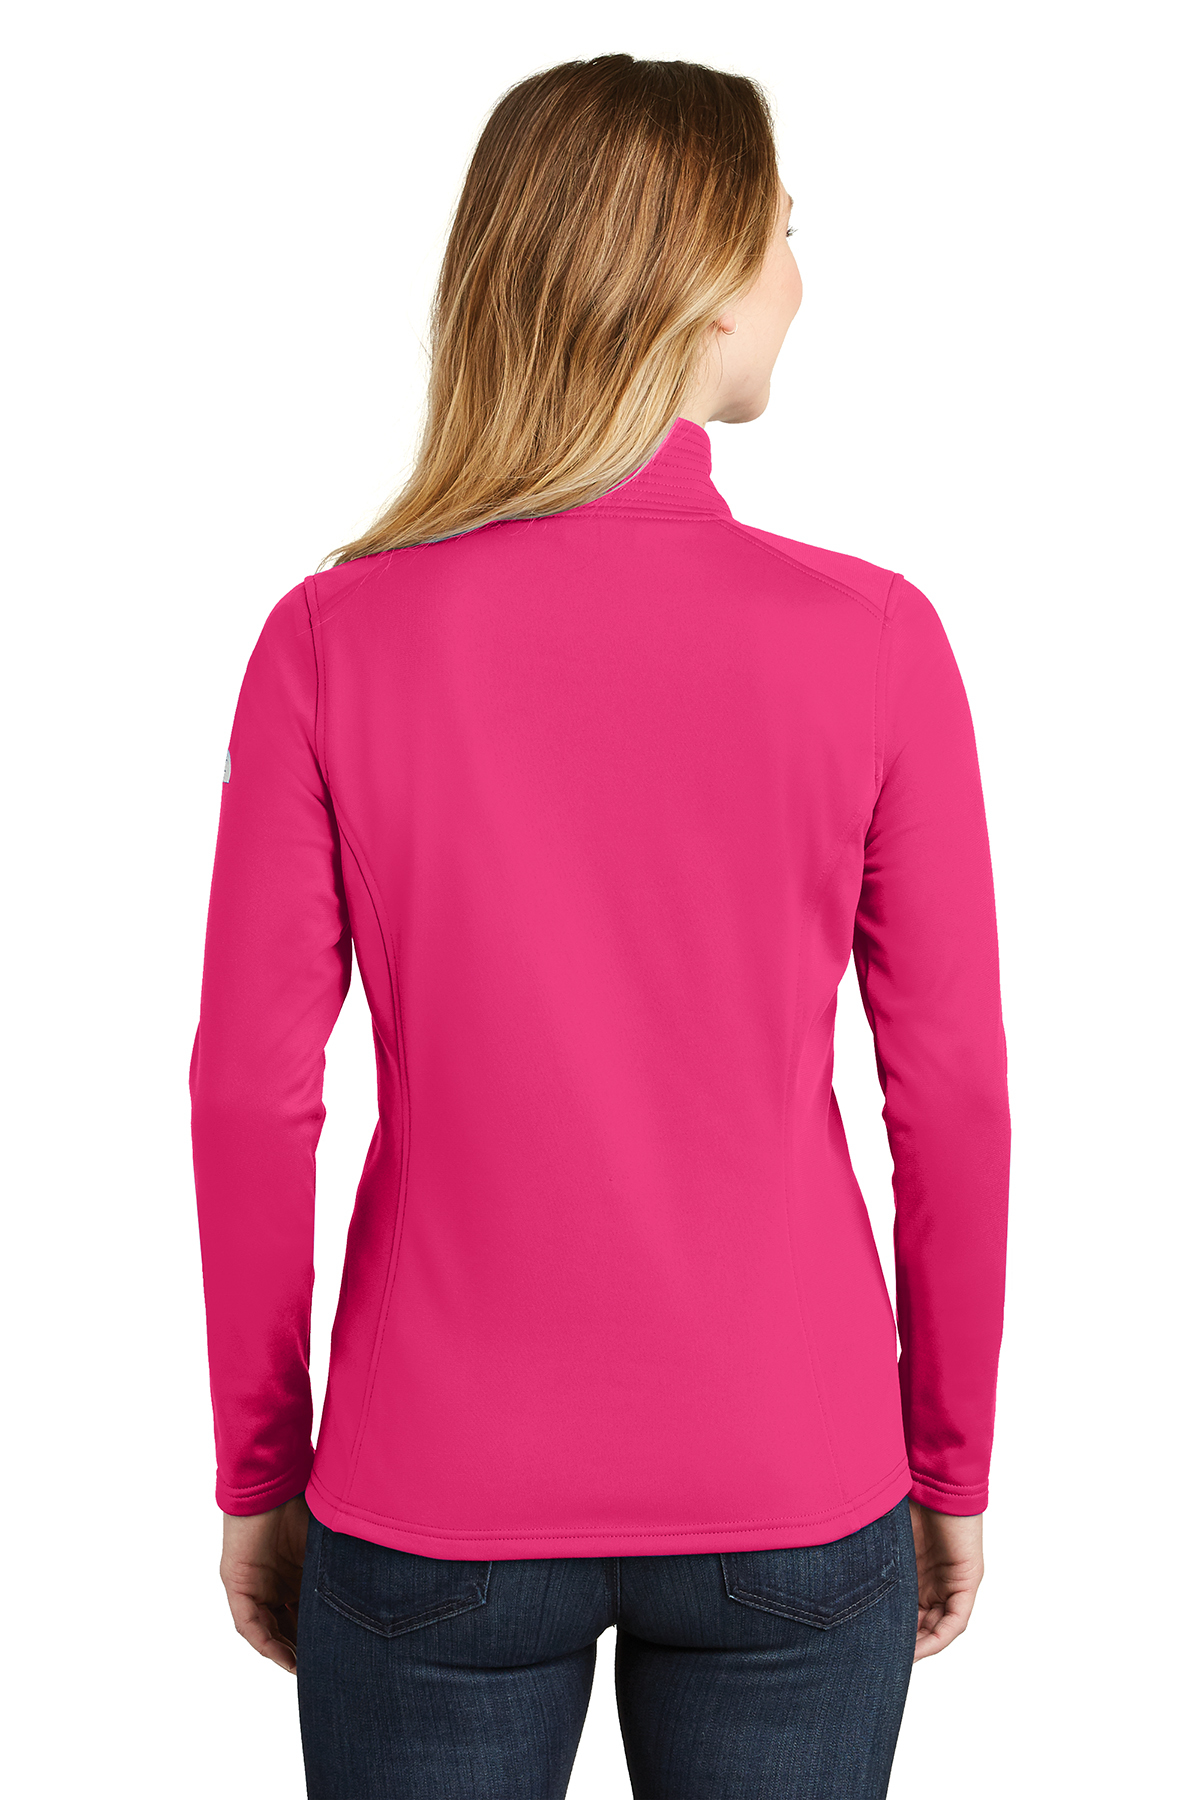 The North Face<SUP>®</SUP> Ladies Tech 1/4-Zip Fleece | Product ...